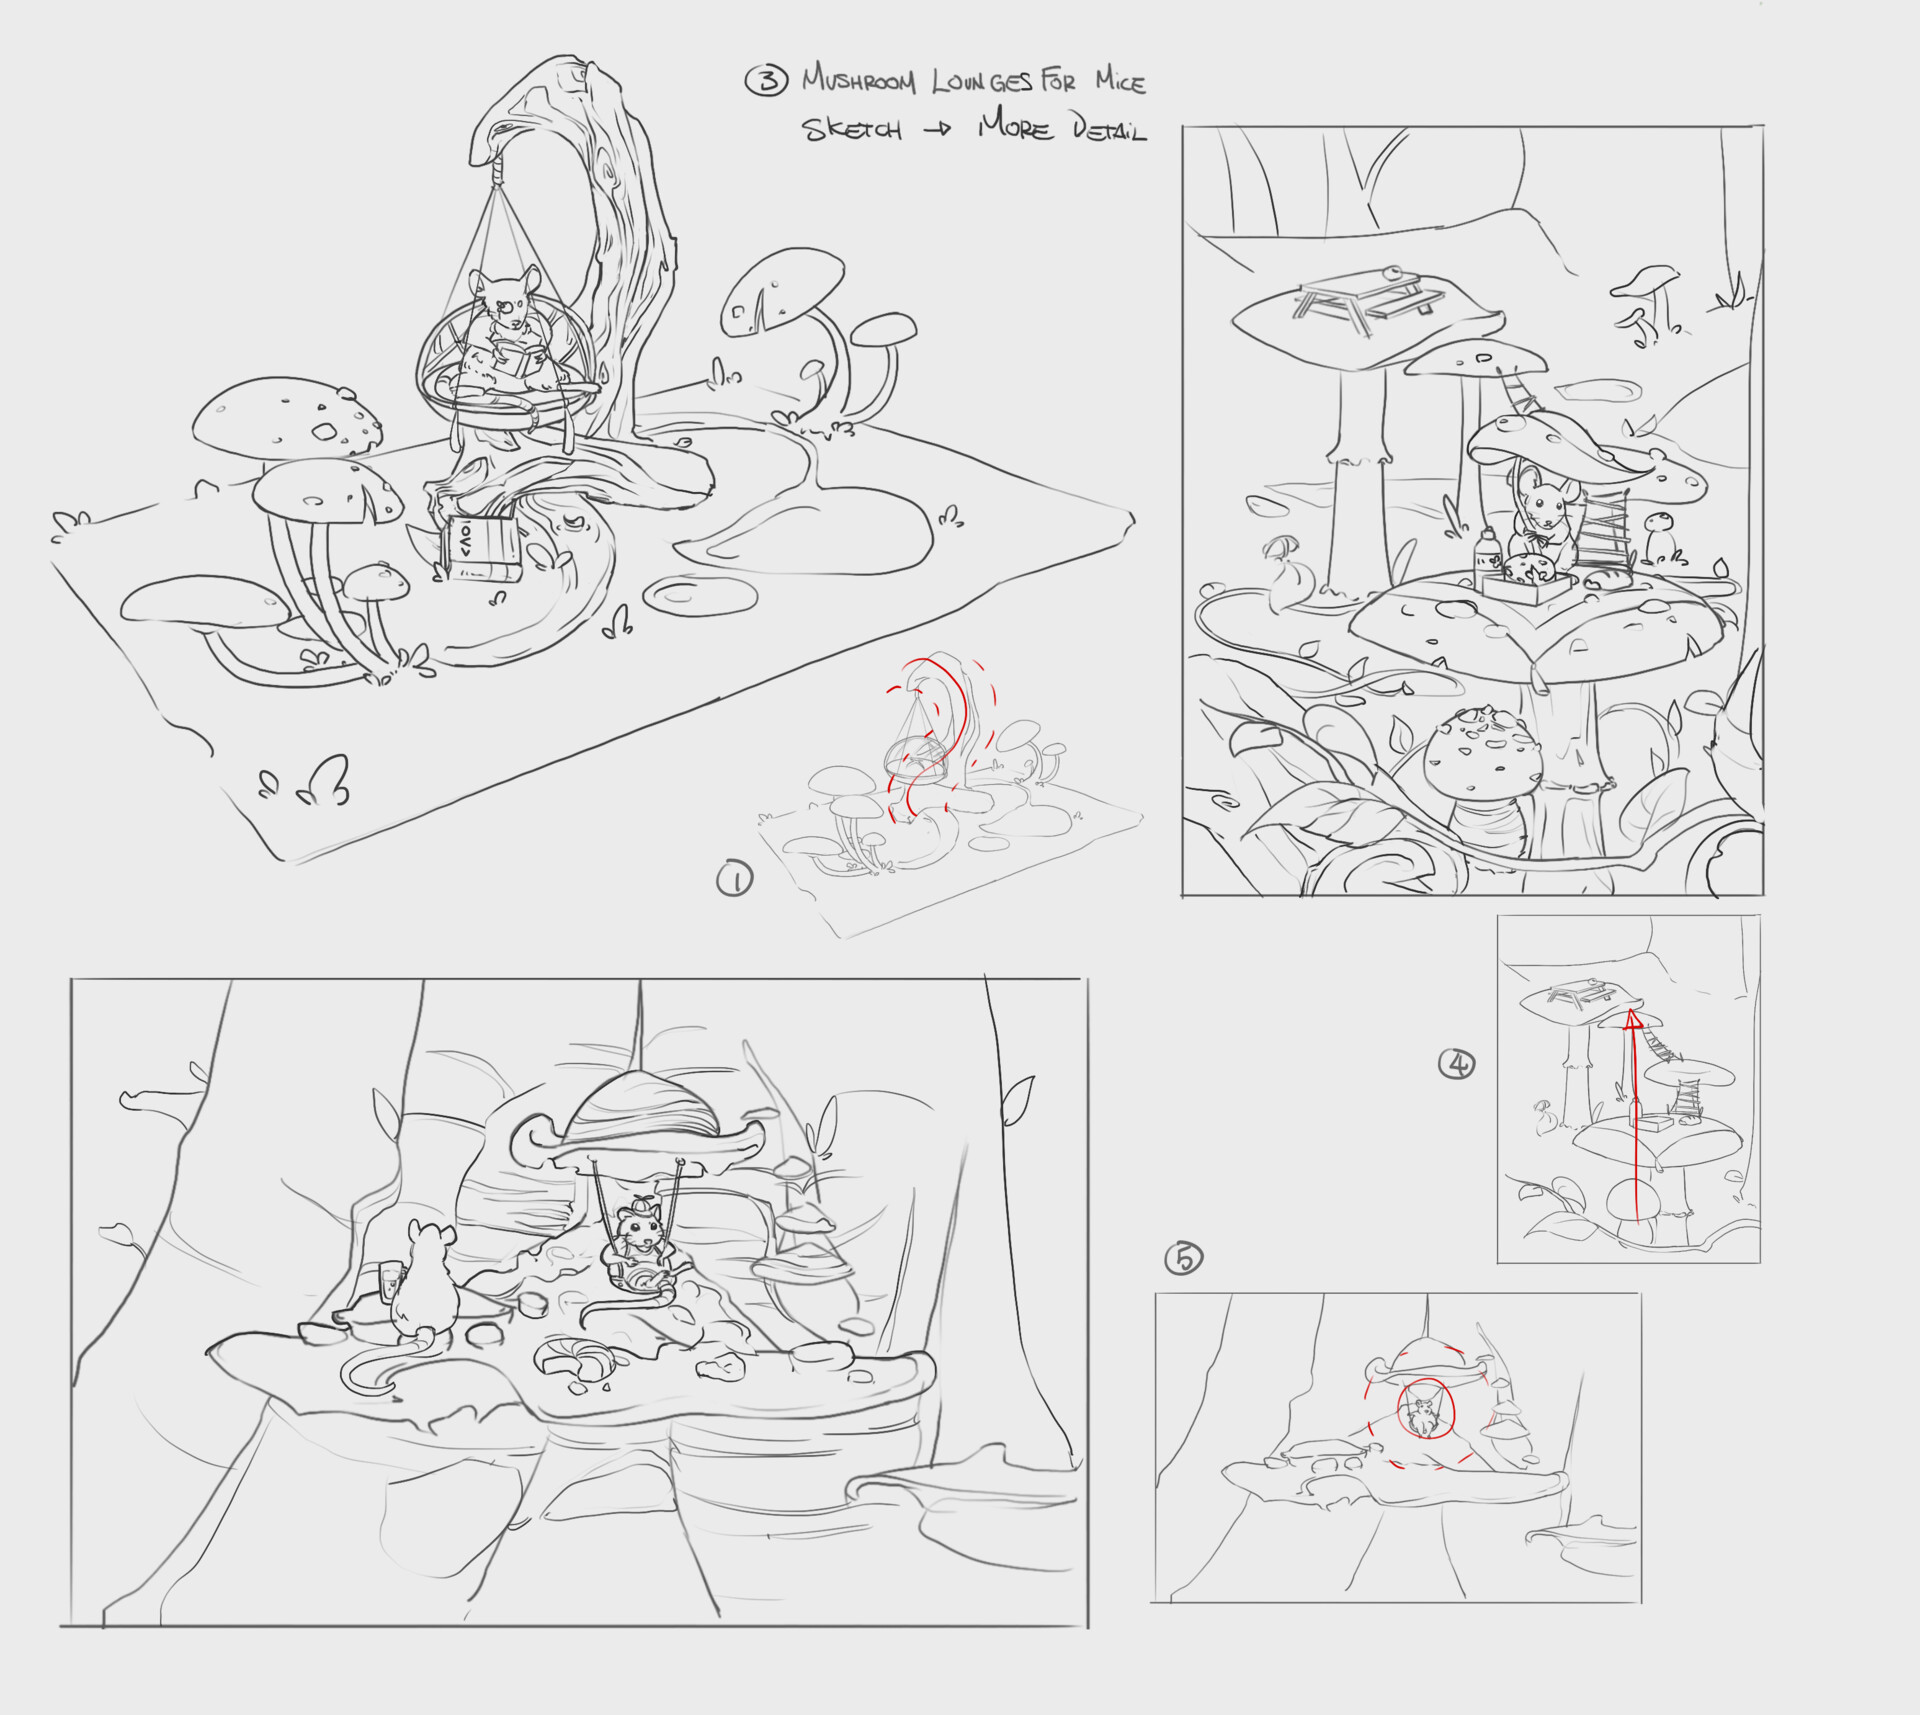 Sketch iterations of the mushroom lounge 3